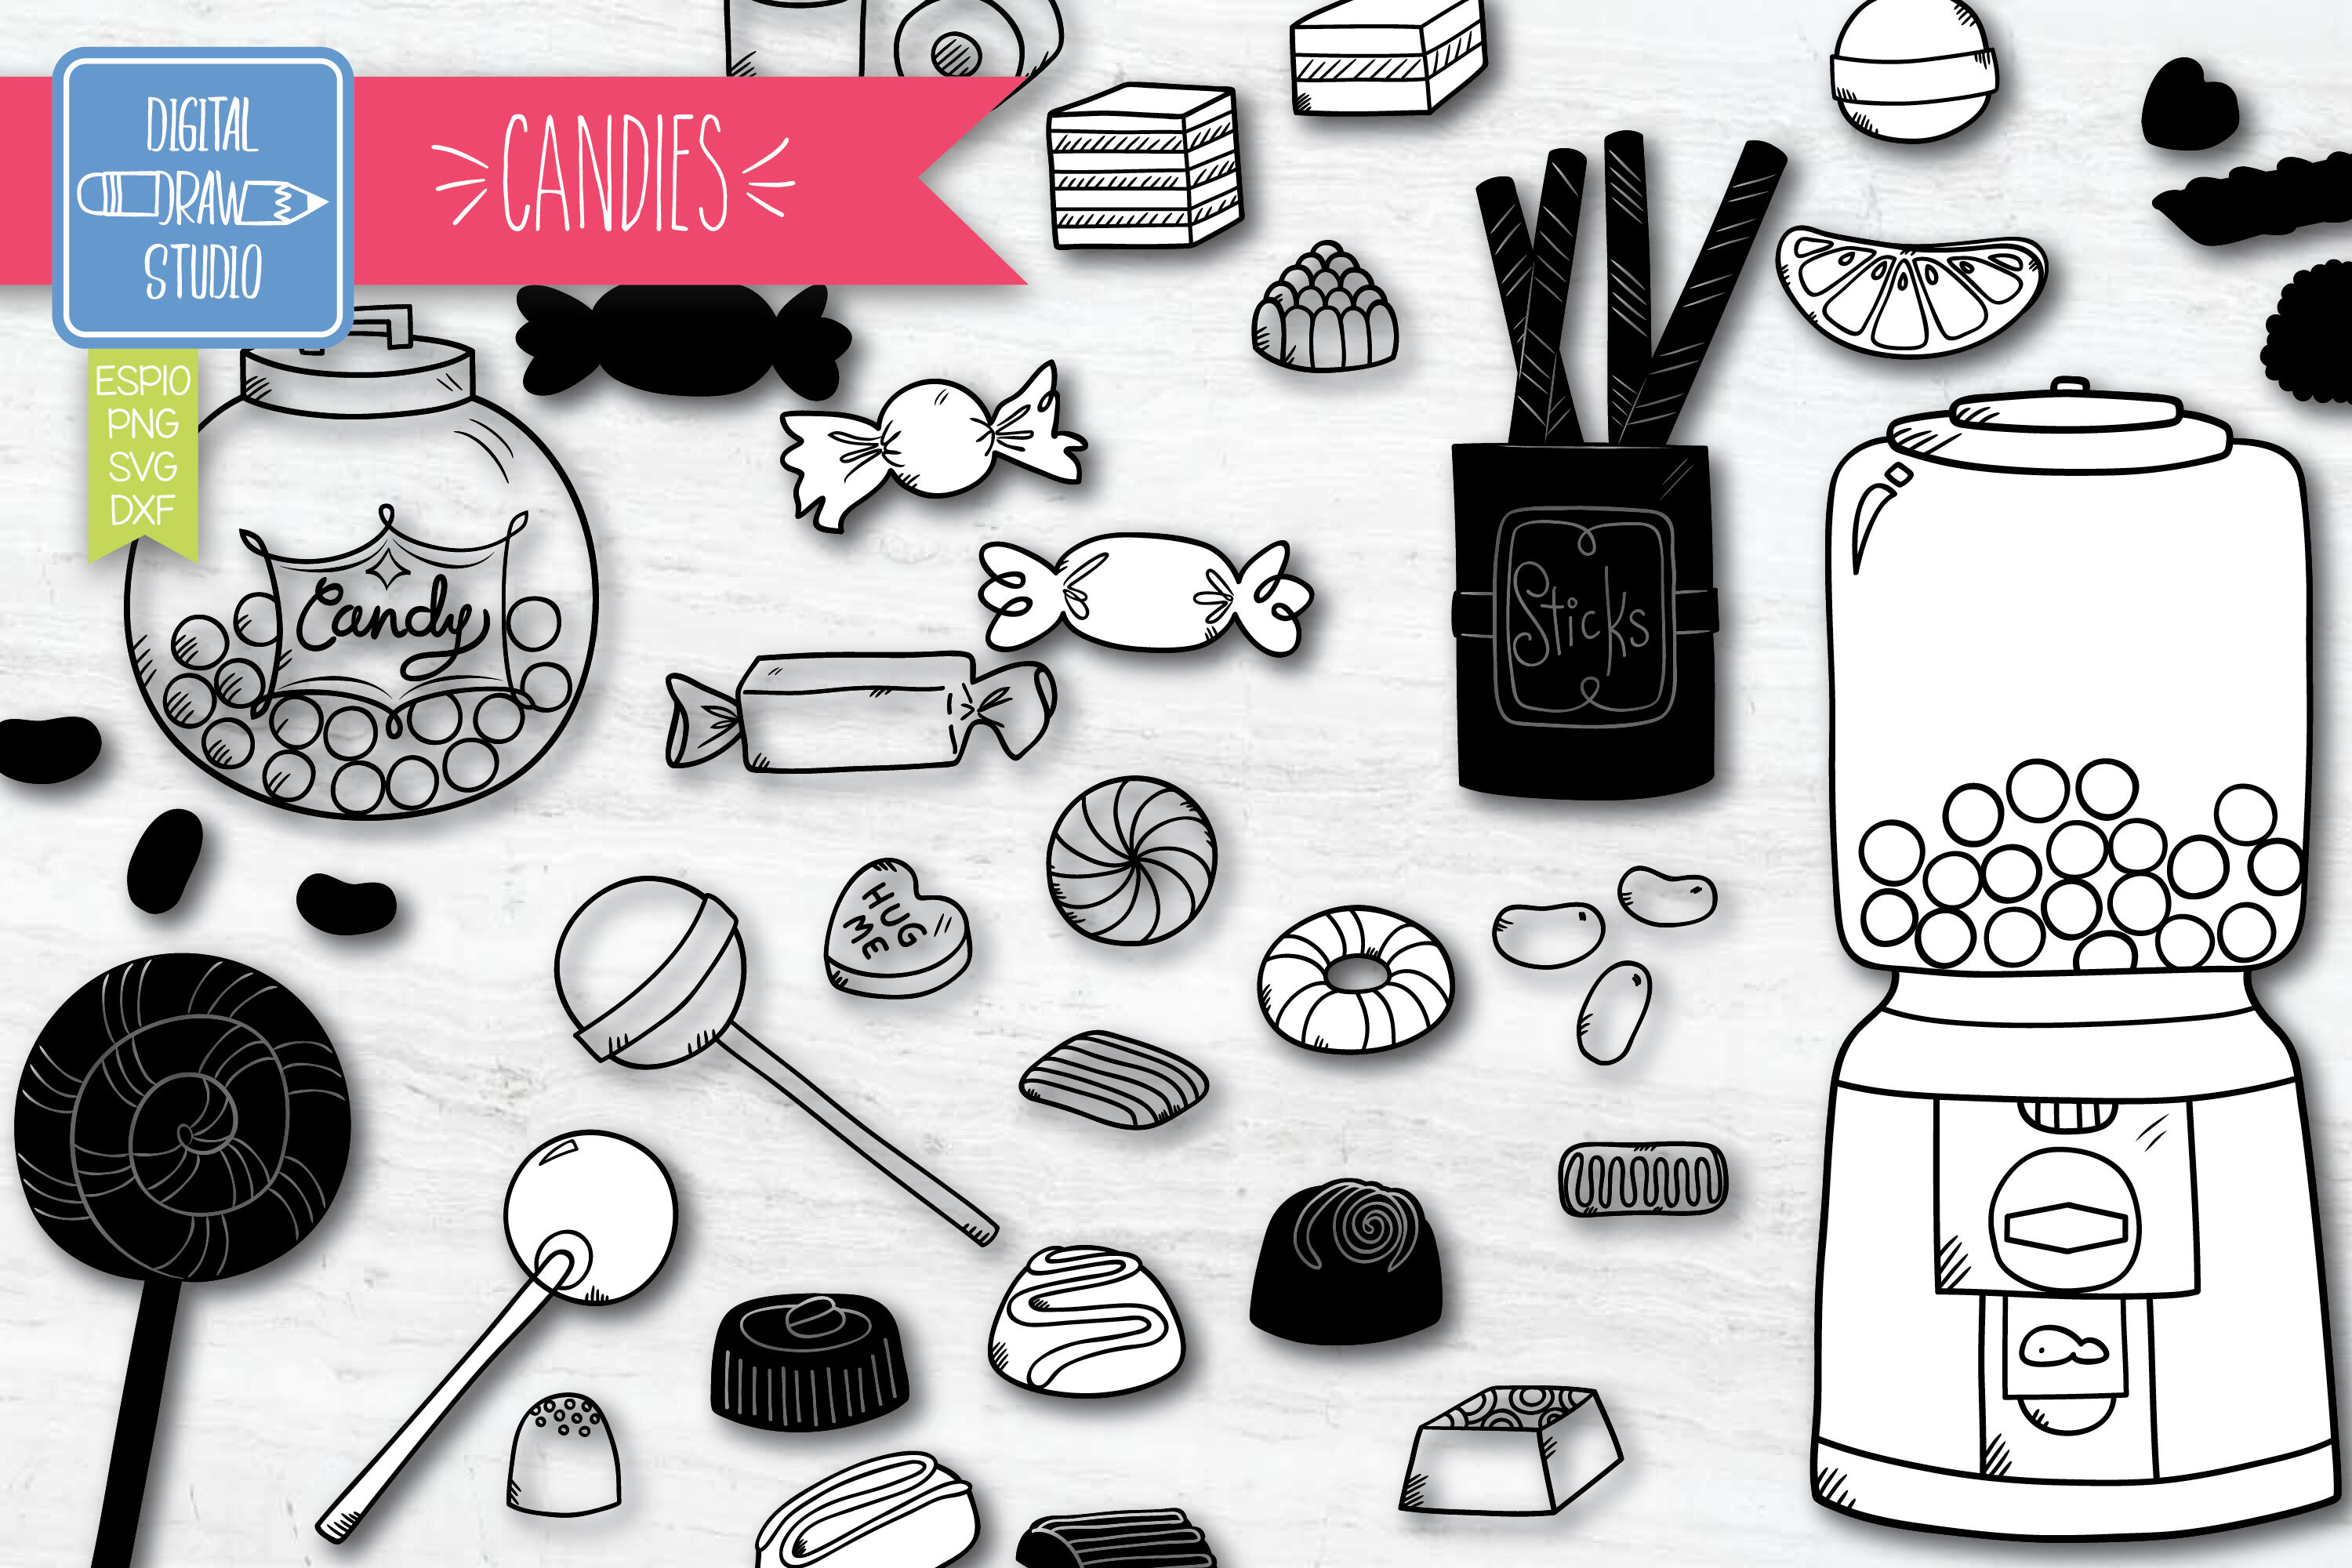 Hand Drawn Candies Doodles Clip Art Vintage Sweets By Digital Draw Studio Thehungryjpeg Com